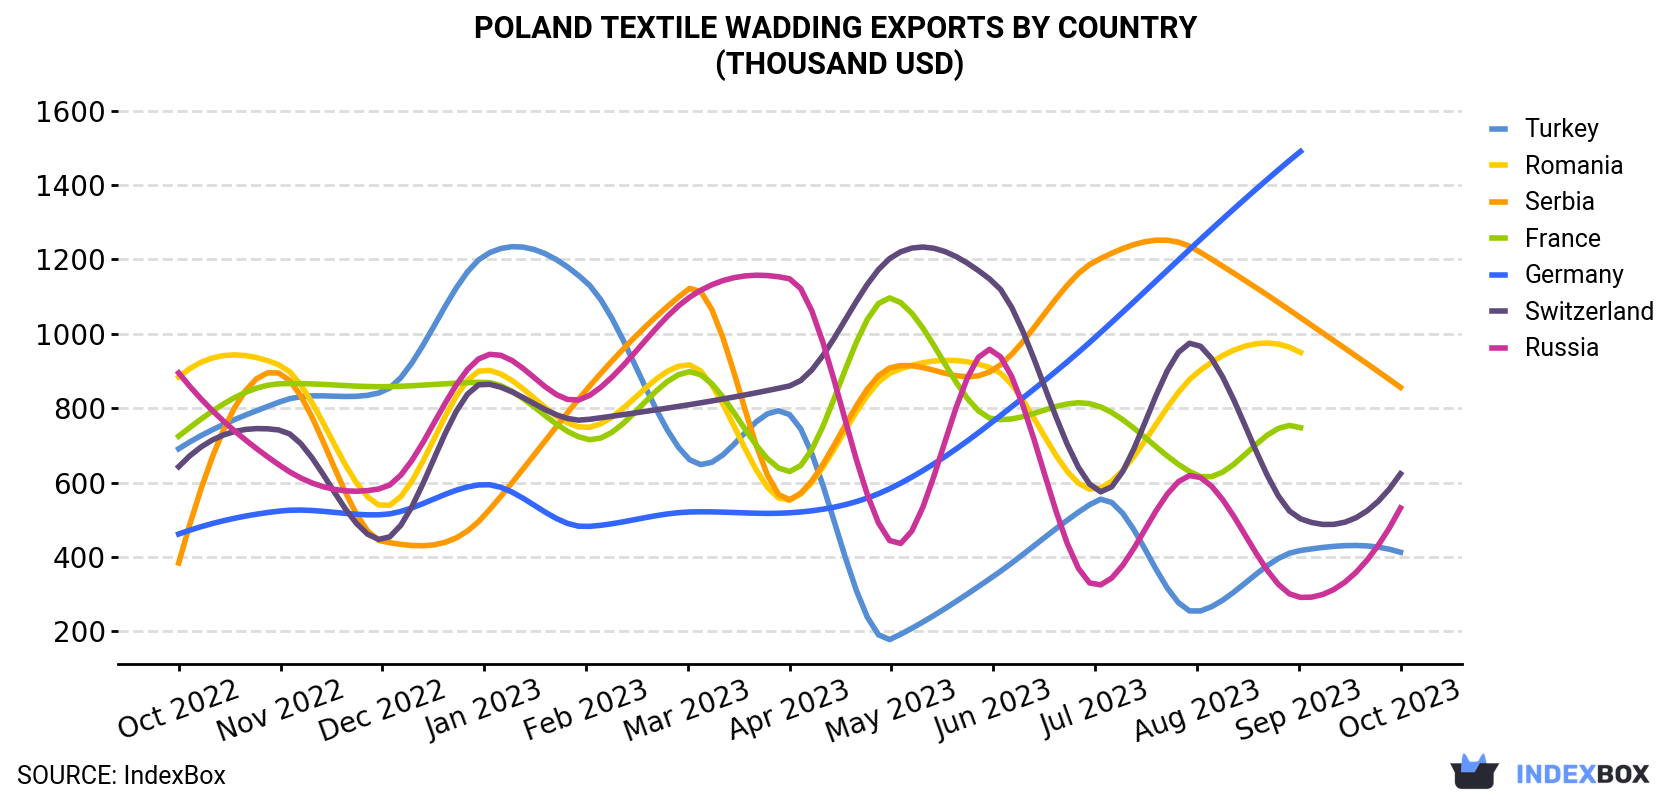 Poland Textile Wadding Exports By Country (Thousand USD)